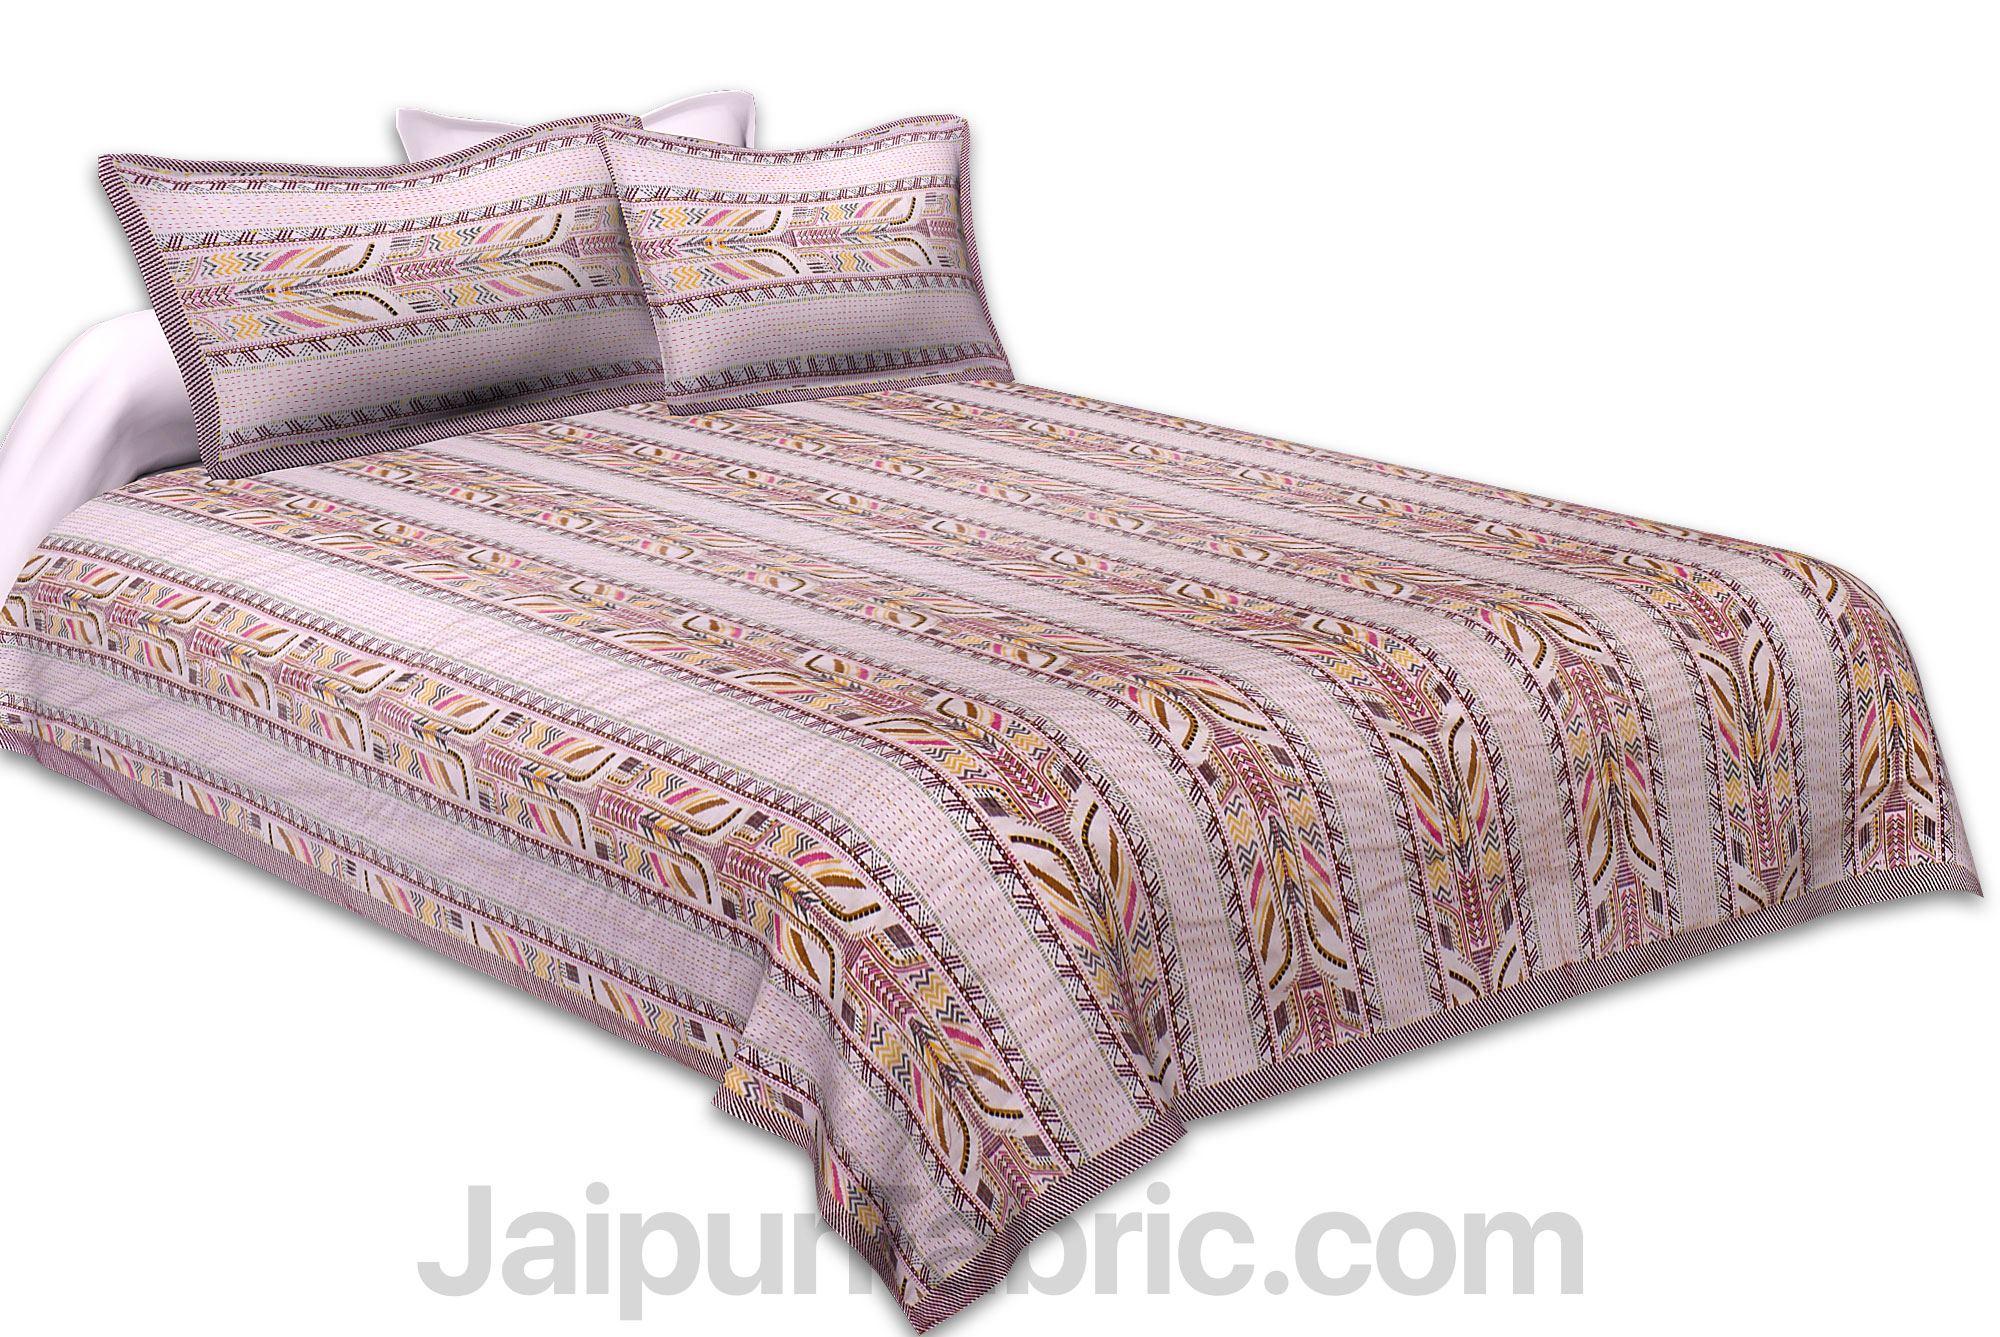 Pinkish Grey Lineal Style Kantha Thread Work Embroidery Double Bedsheet / Dohar / Light Blanket / Thin Comforter